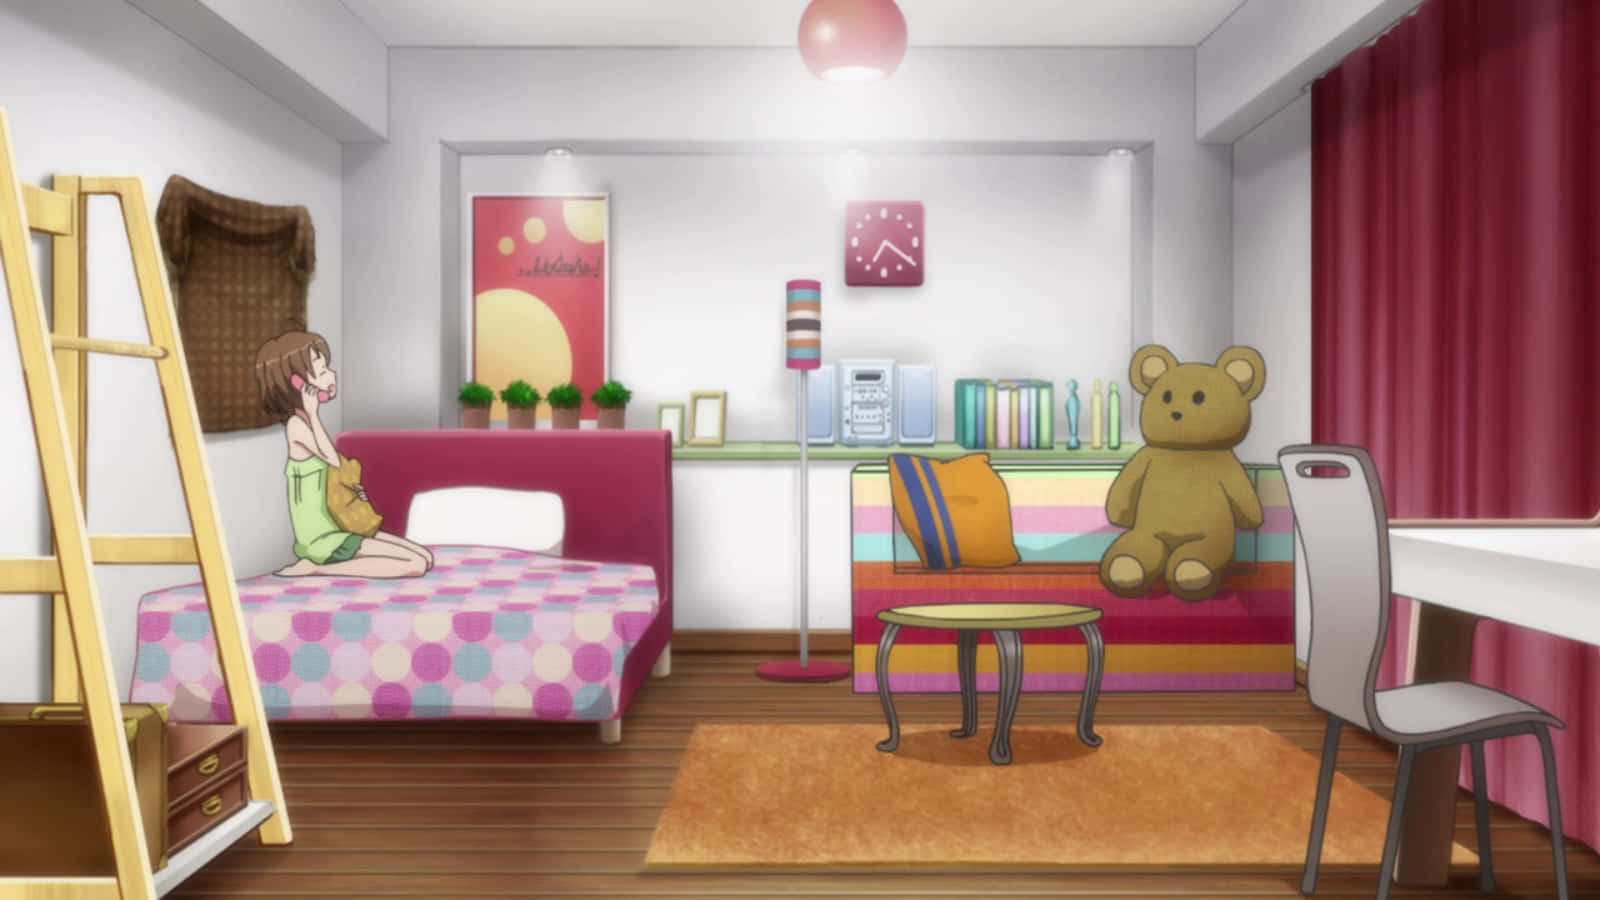 A Room With A Bed, A Desk, And A Teddy Bear